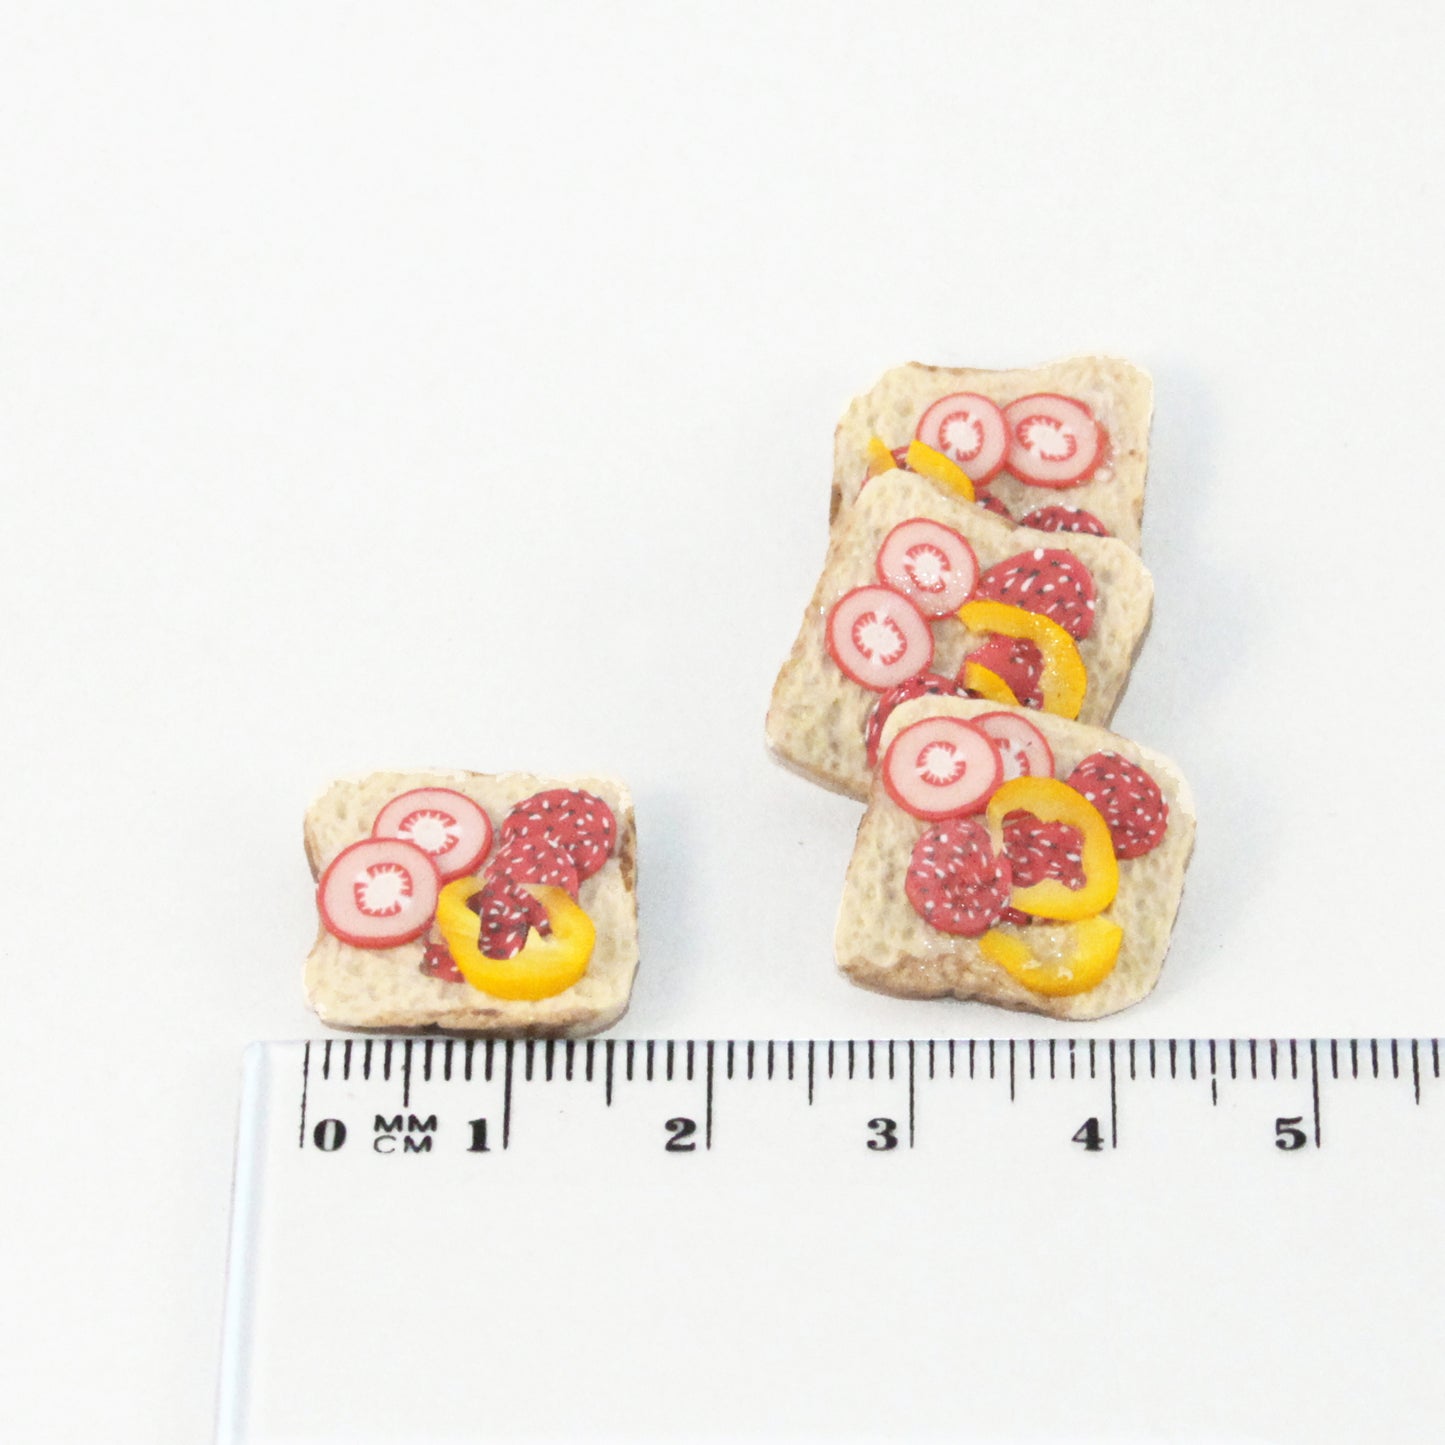 Sandwich with cold cuts - several versions 